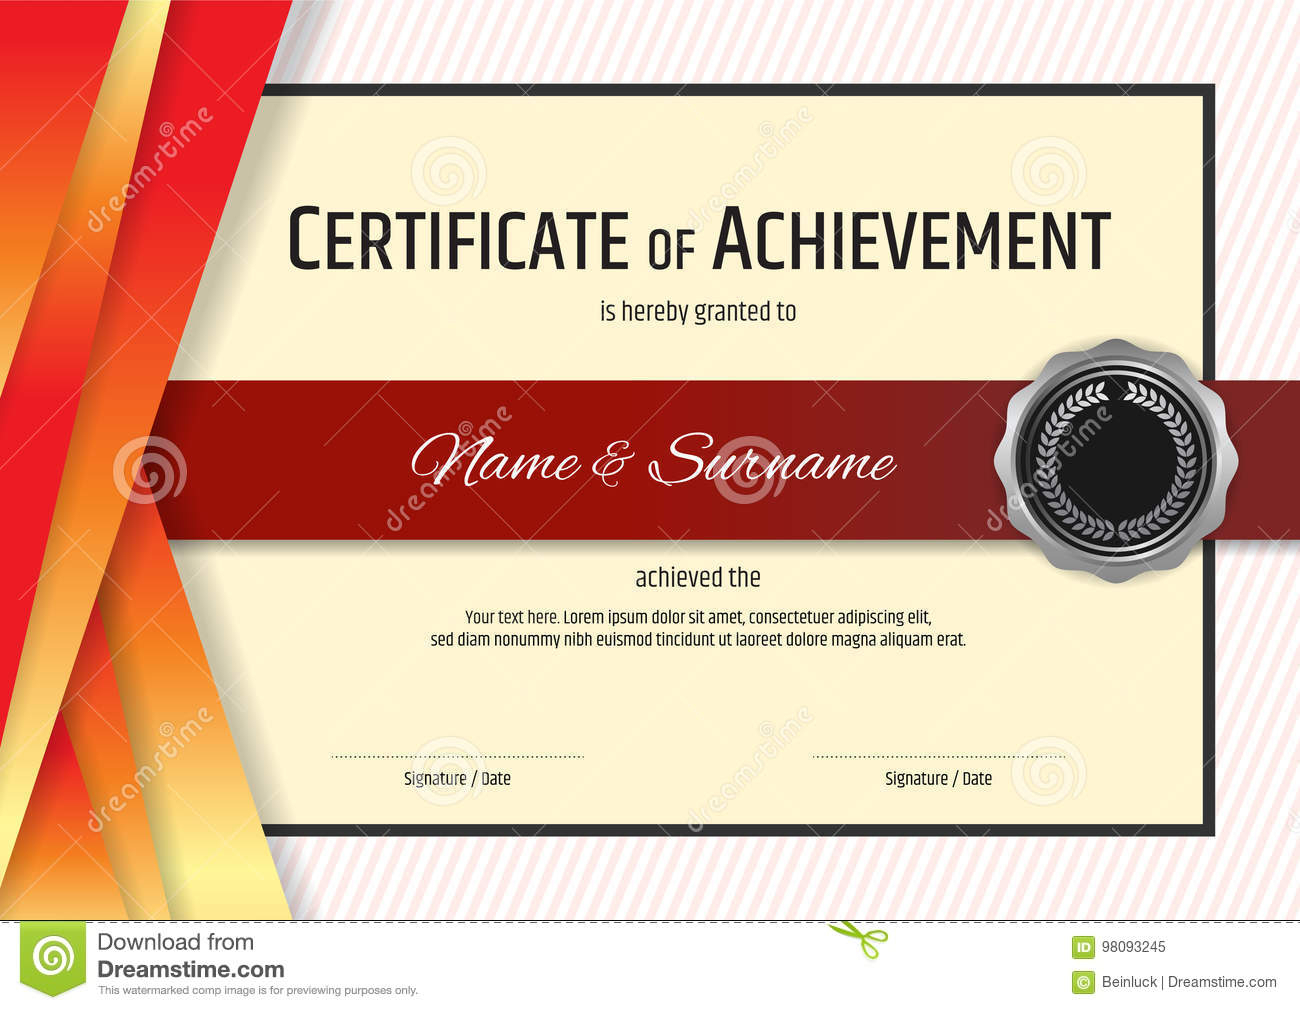 Luxury Certificate Template With Elegant Border Frame With Elegant Certificate Templates Free